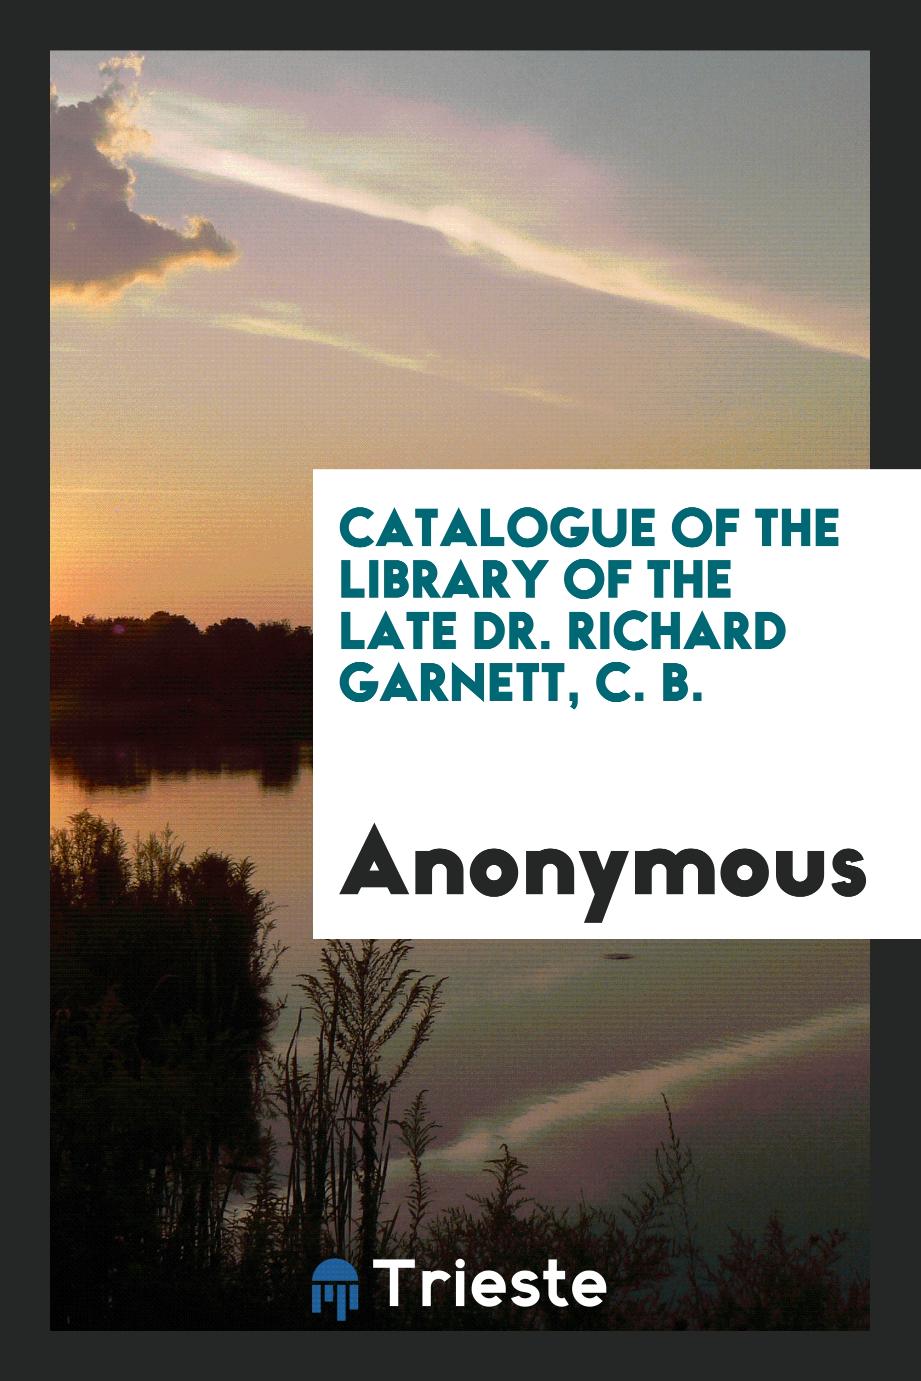 Catalogue of the Library of the late Dr. Richard Garnett, C. B.